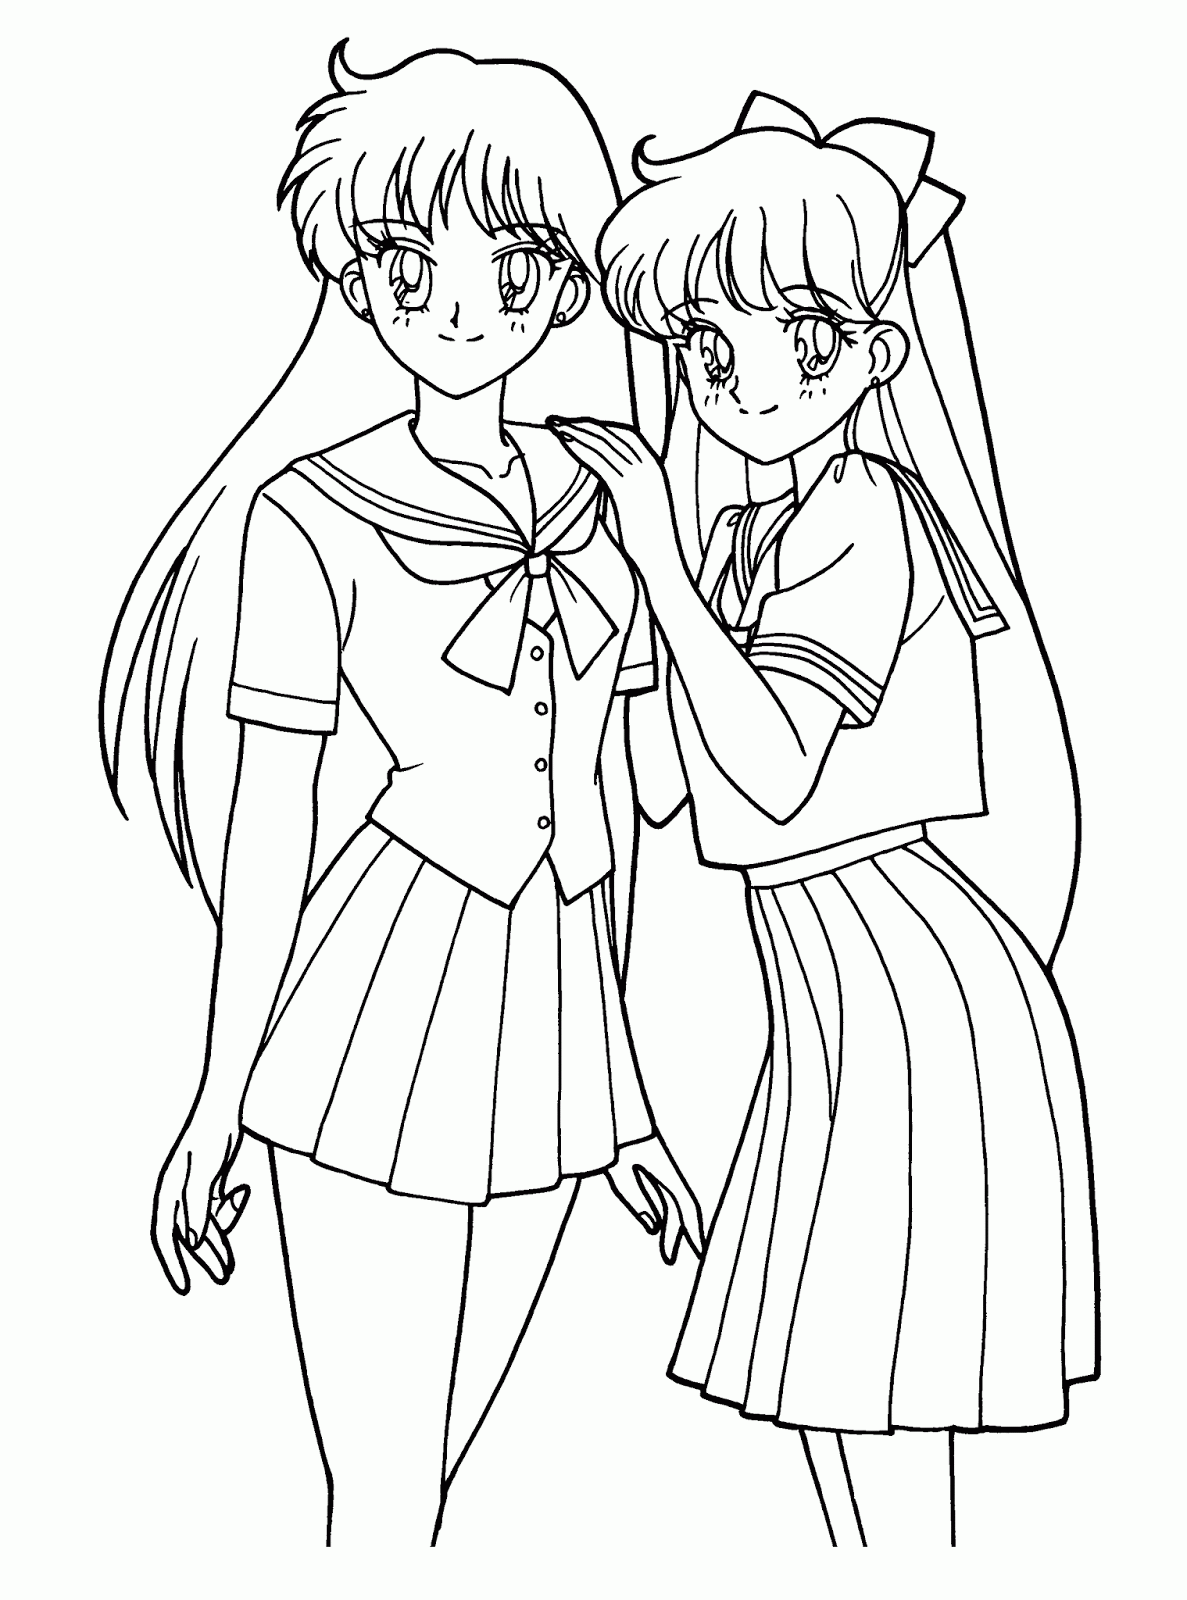 Anime Girl Coloring Pages - Clip Art Library - Coloring Home